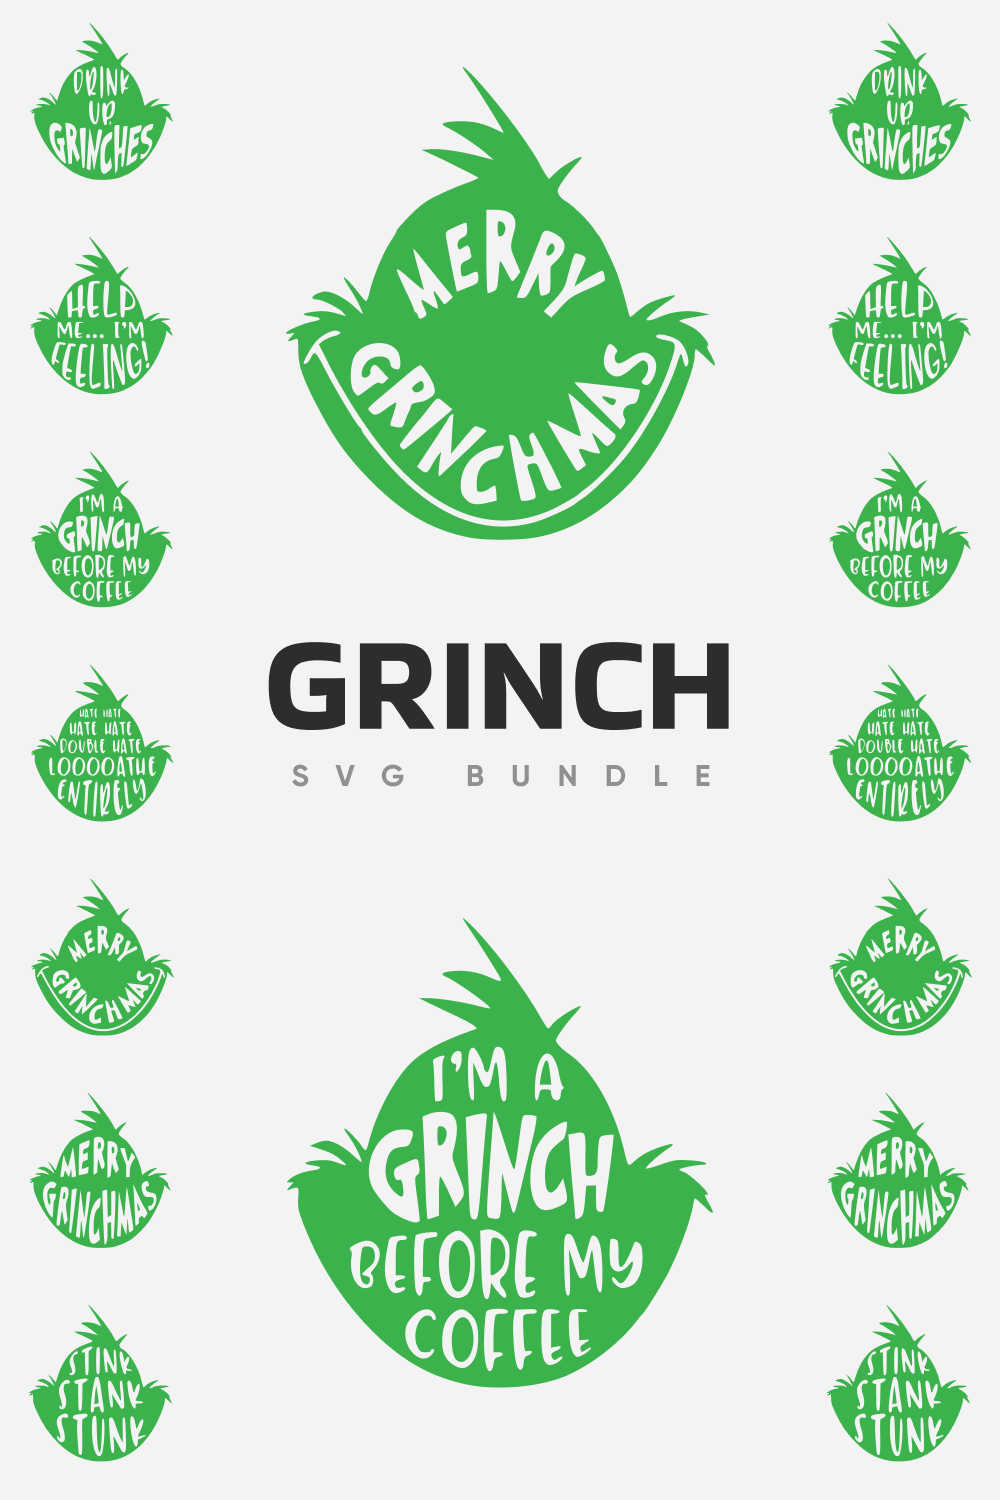 Green faces of the Grinch with inscriptions of different sizes.